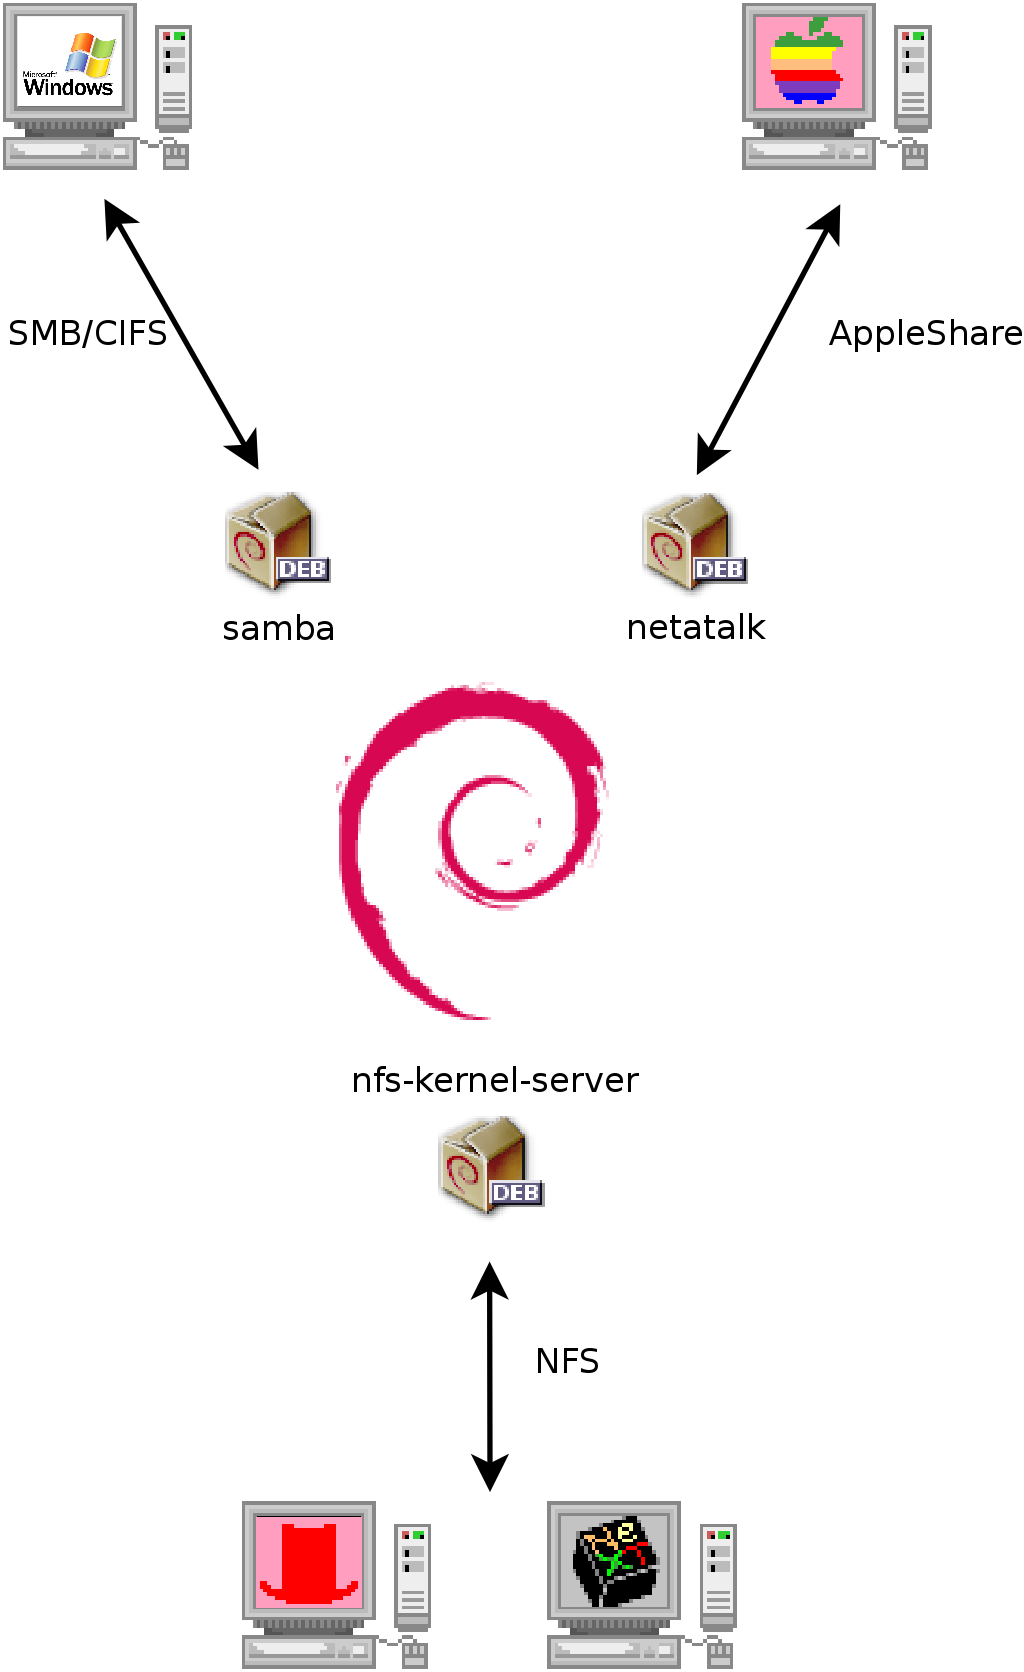 Coexistence of Debian with OS X, Windows and Unix systems